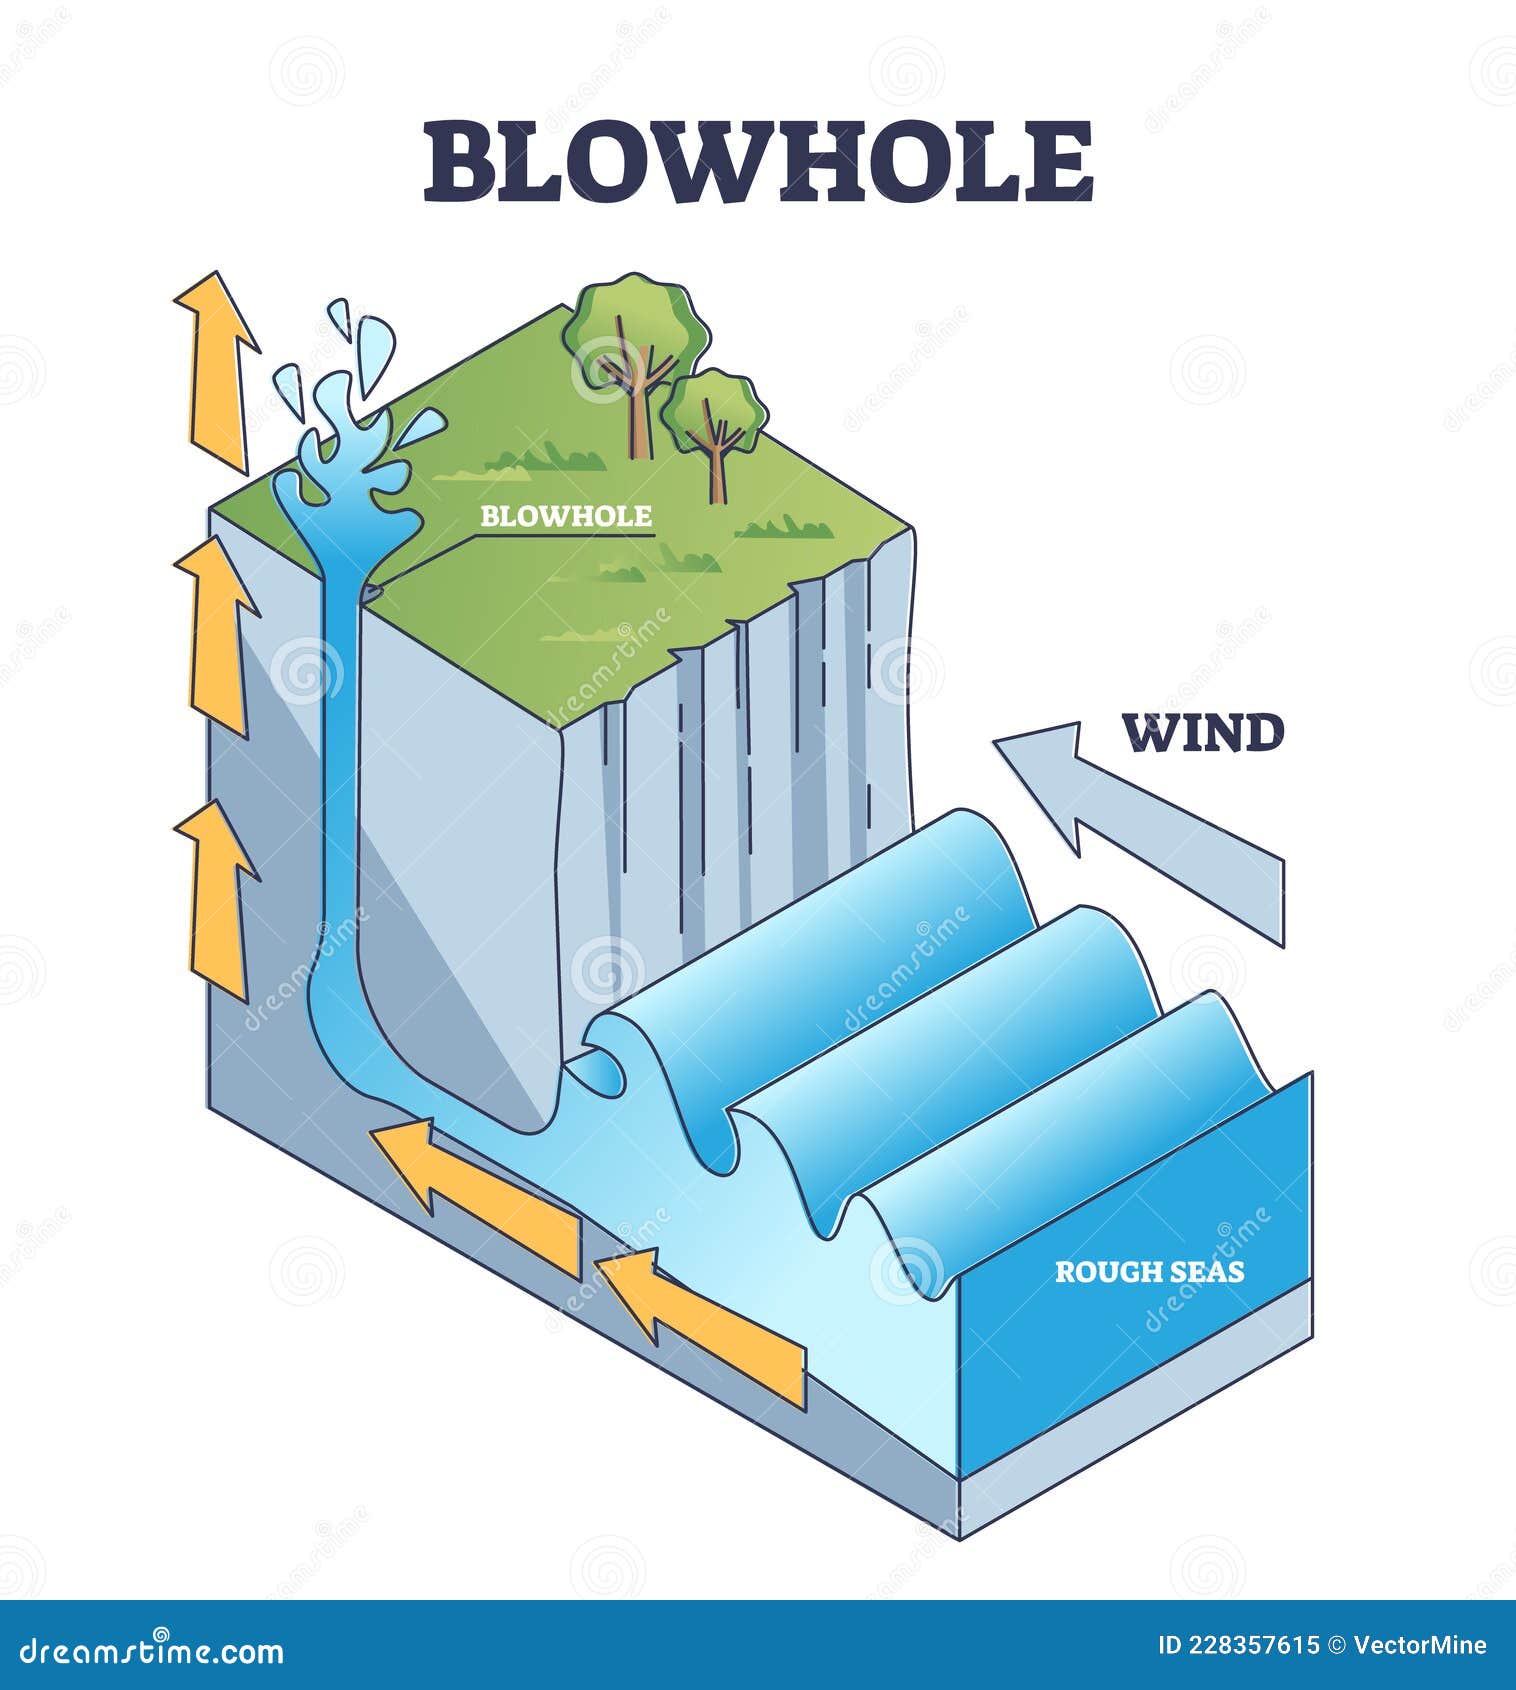 blowhole or marine geyser formation in sea caves explanation outline diagram